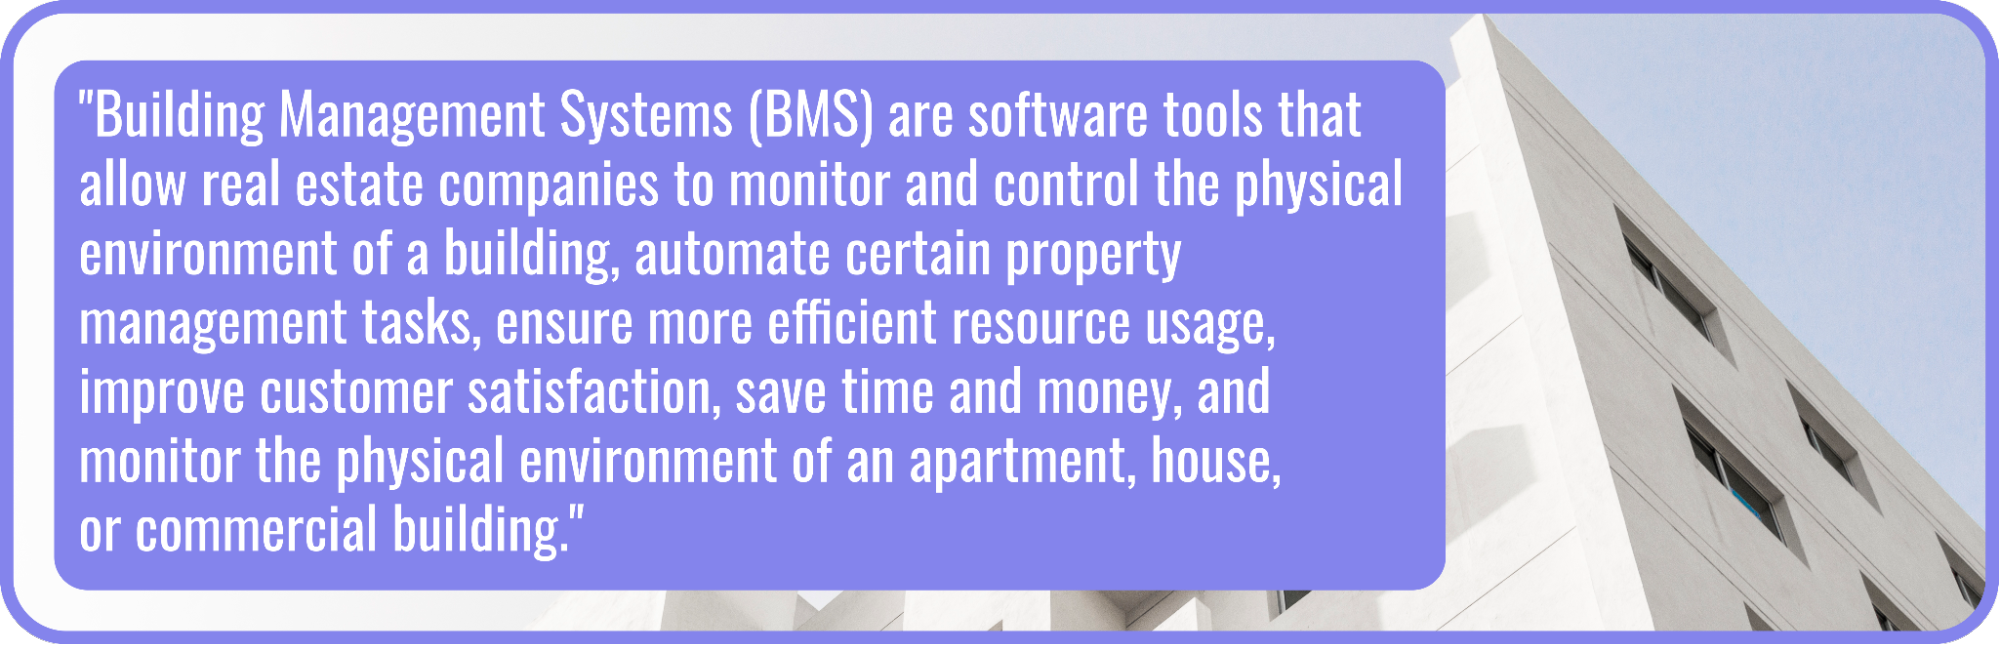 Building management systems (BMS)